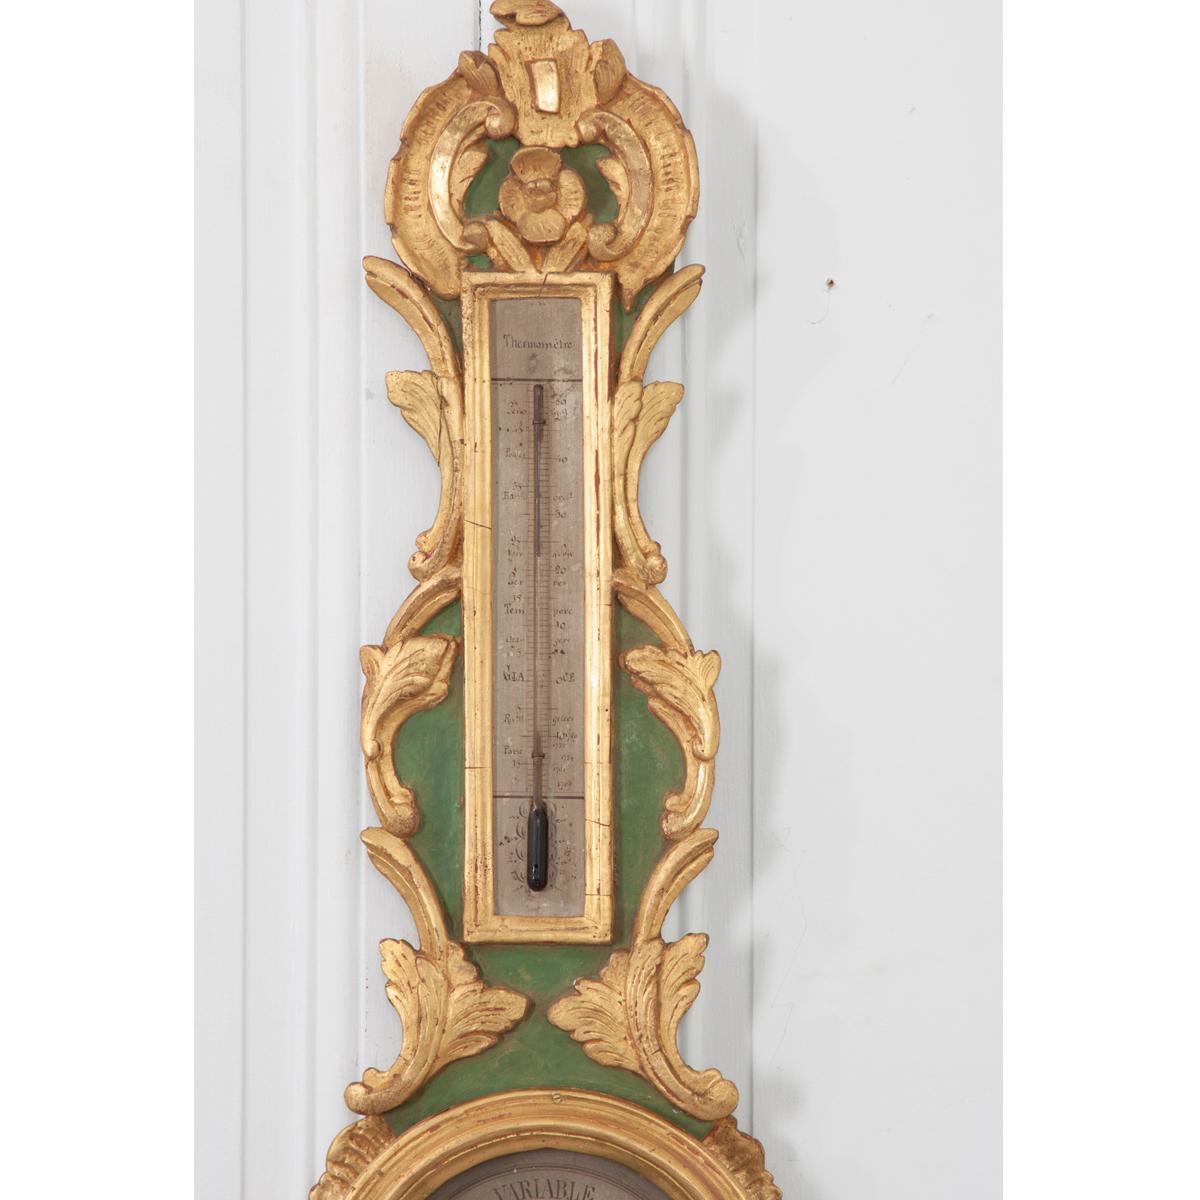 French 19th painted and gold gilt barometer and thermometer. It is a recognizable ‘banjo’ shaped scientific instrument with all the carved details in gold gilt and the background is painted a sage green. The circular face has painted numbers and